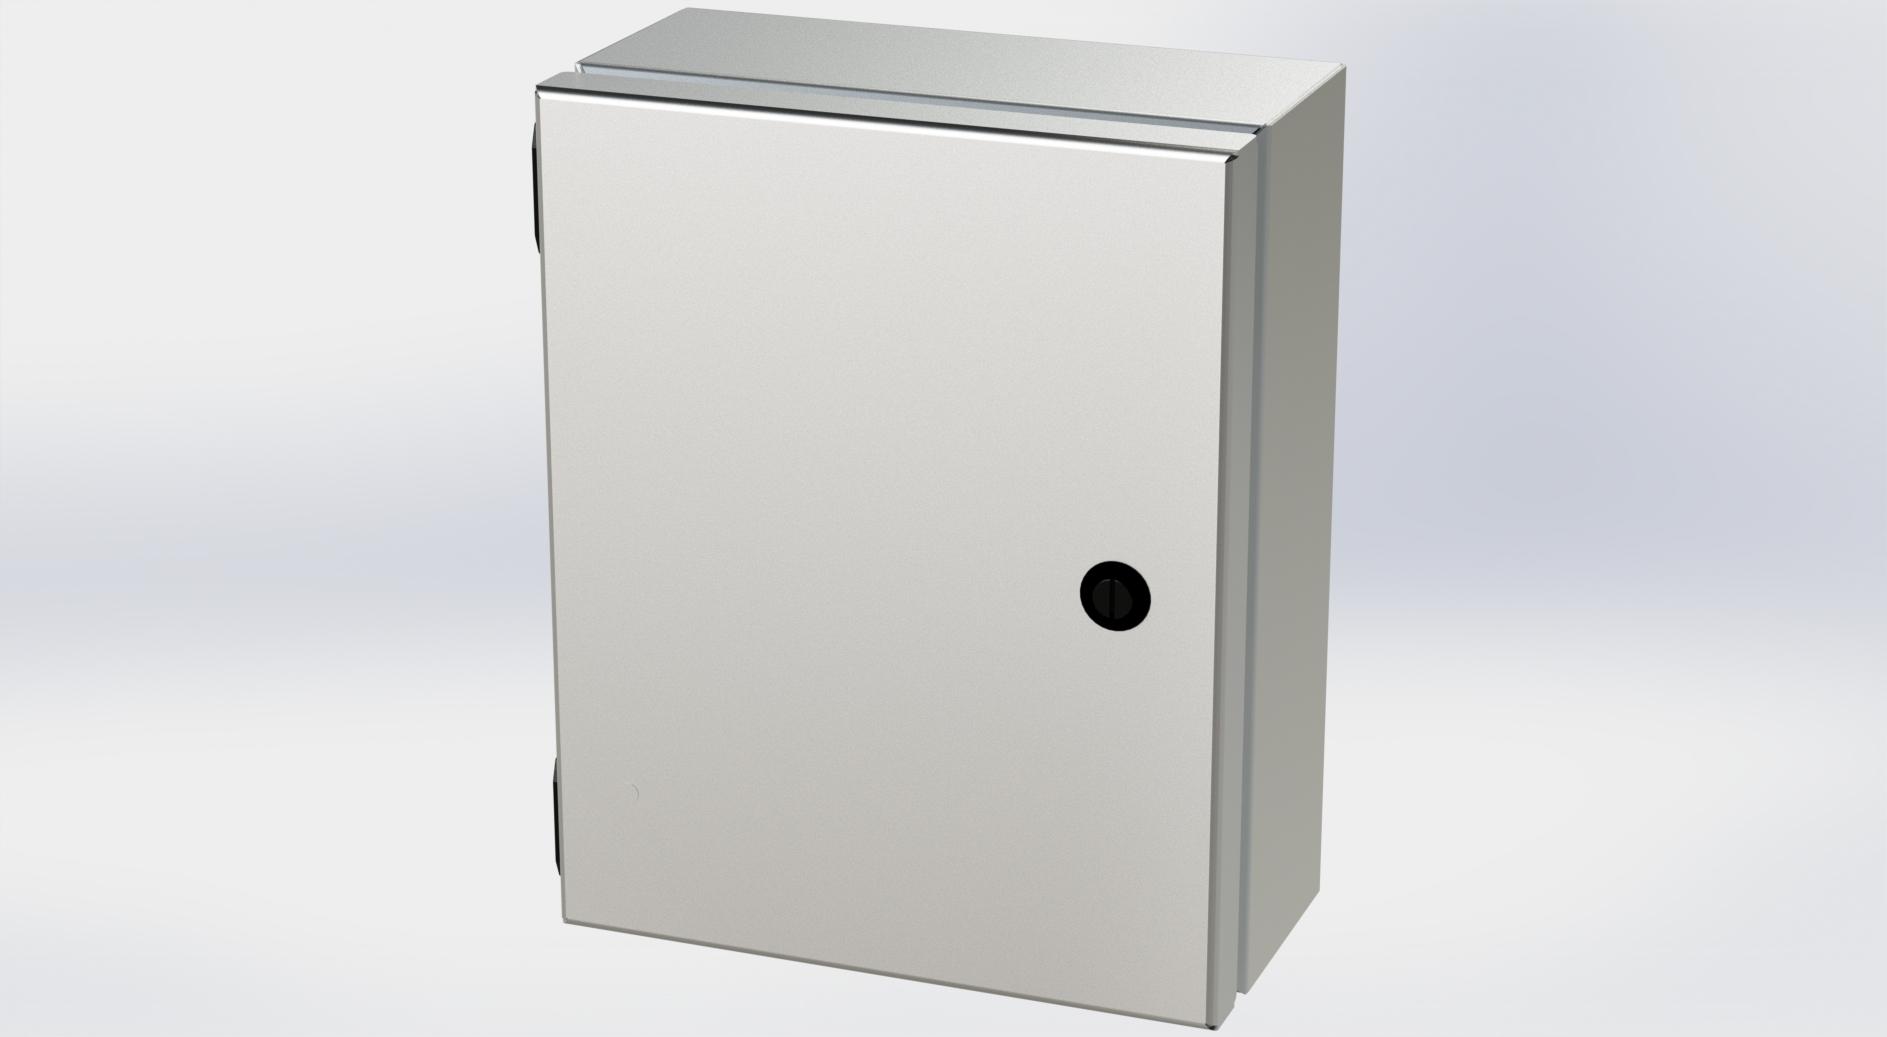 Saginaw Control SCE-1008ELJSS6 S.S. ELJ Enclosure, Height:10.00", Width:8.00", Depth:4.00", #4 brushed finish on all exterior surfaces. Optional sub-panels are powder coated white.